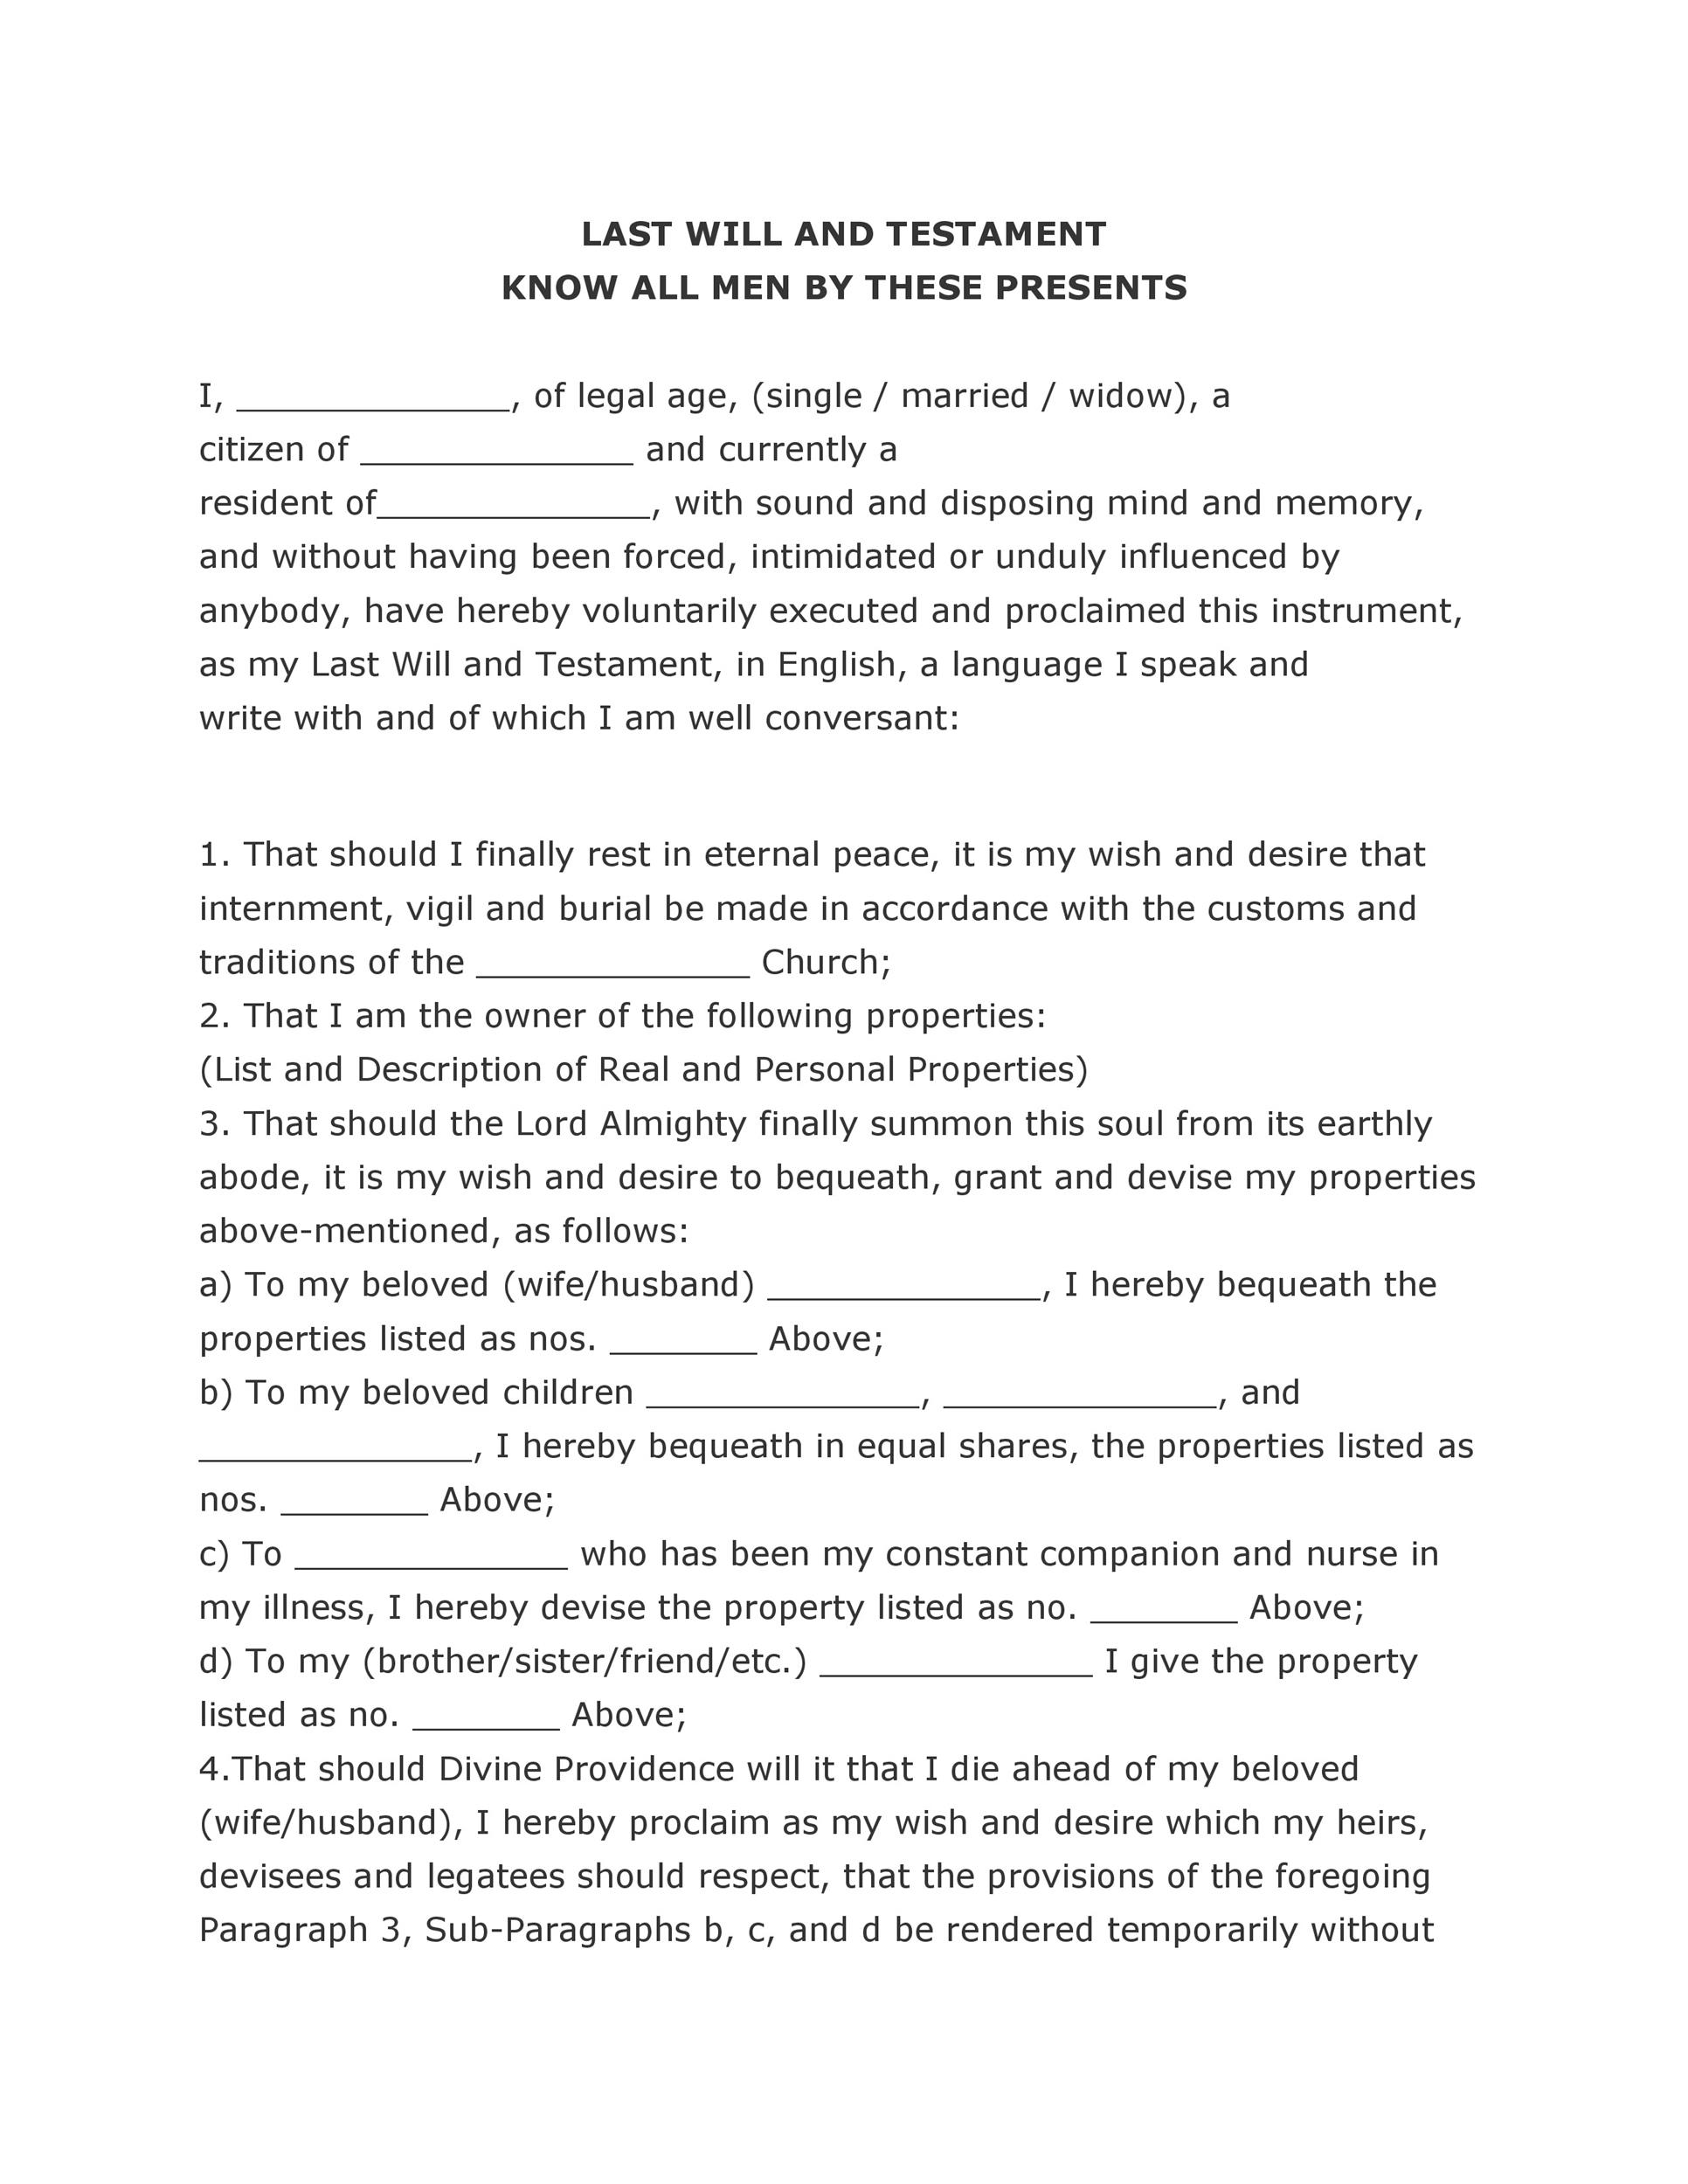 39 Last Will and Testament Forms Templates ᐅ TemplateLab